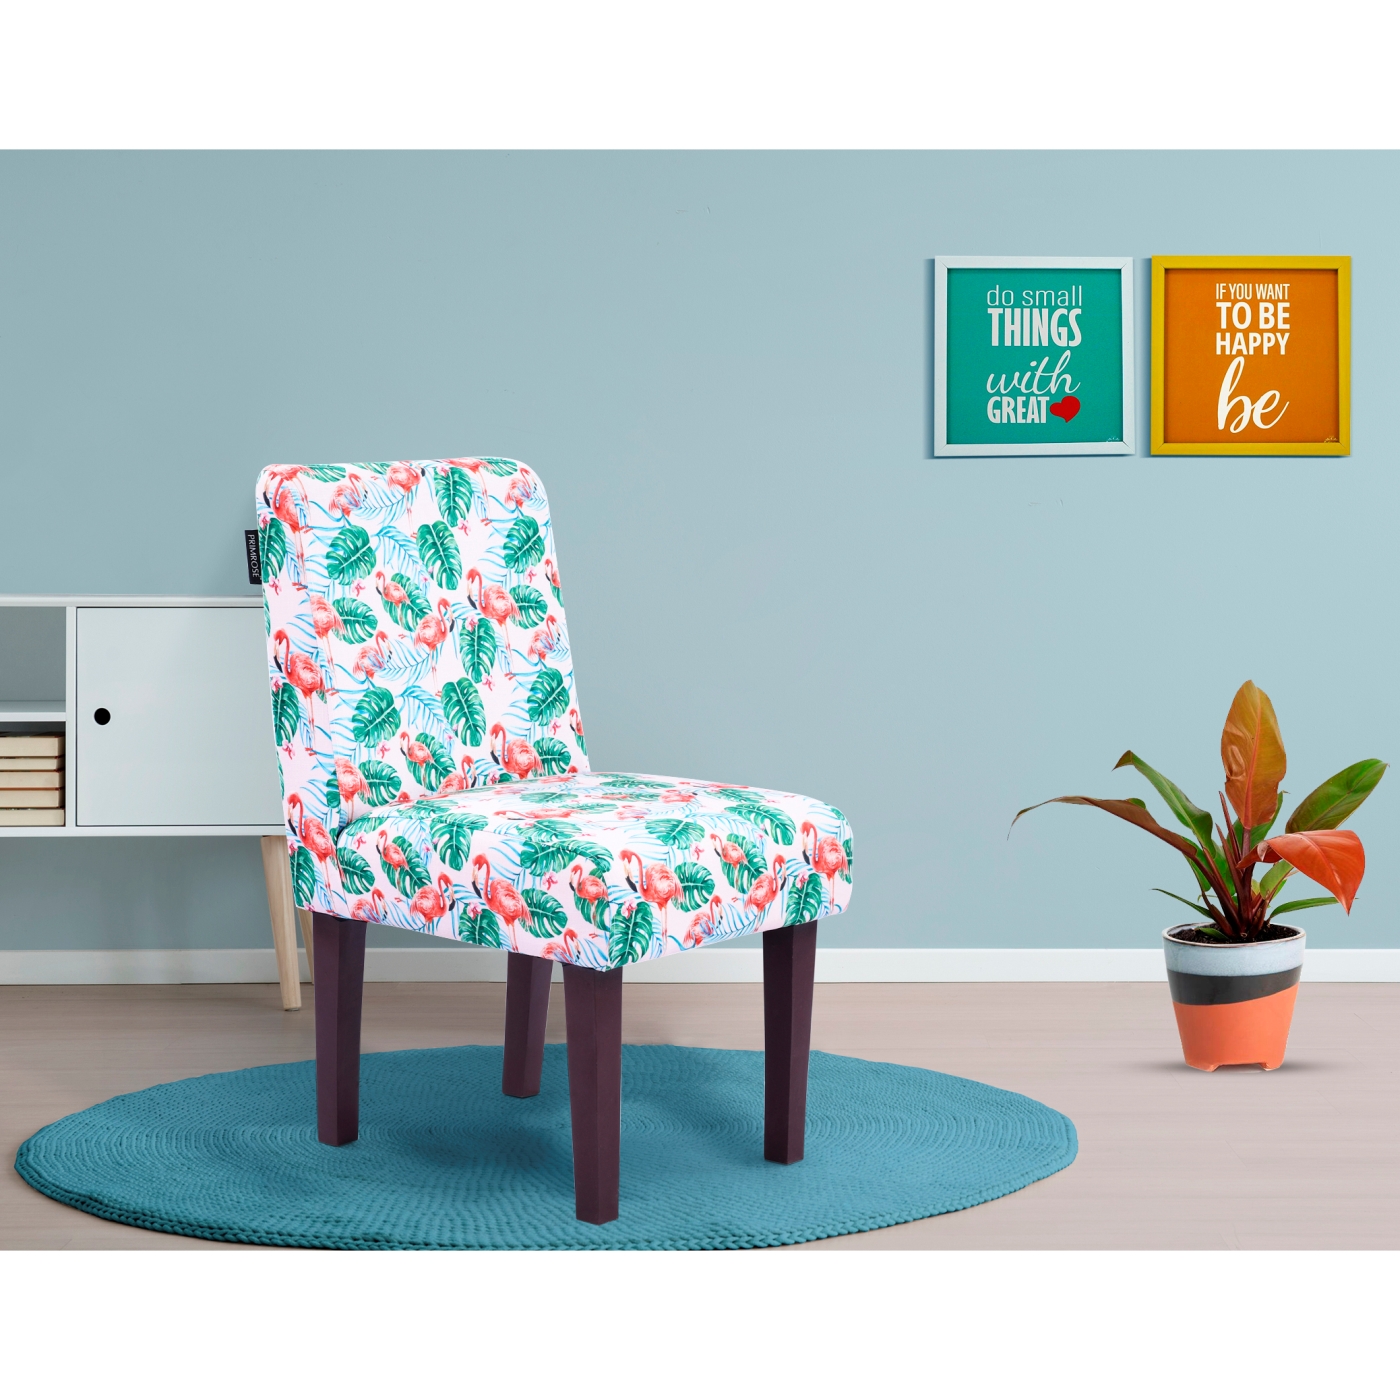 PRIMROSE Tropical Flamingo Digital Printed Faux Linen Fabric Dining Chair - Red, Green  